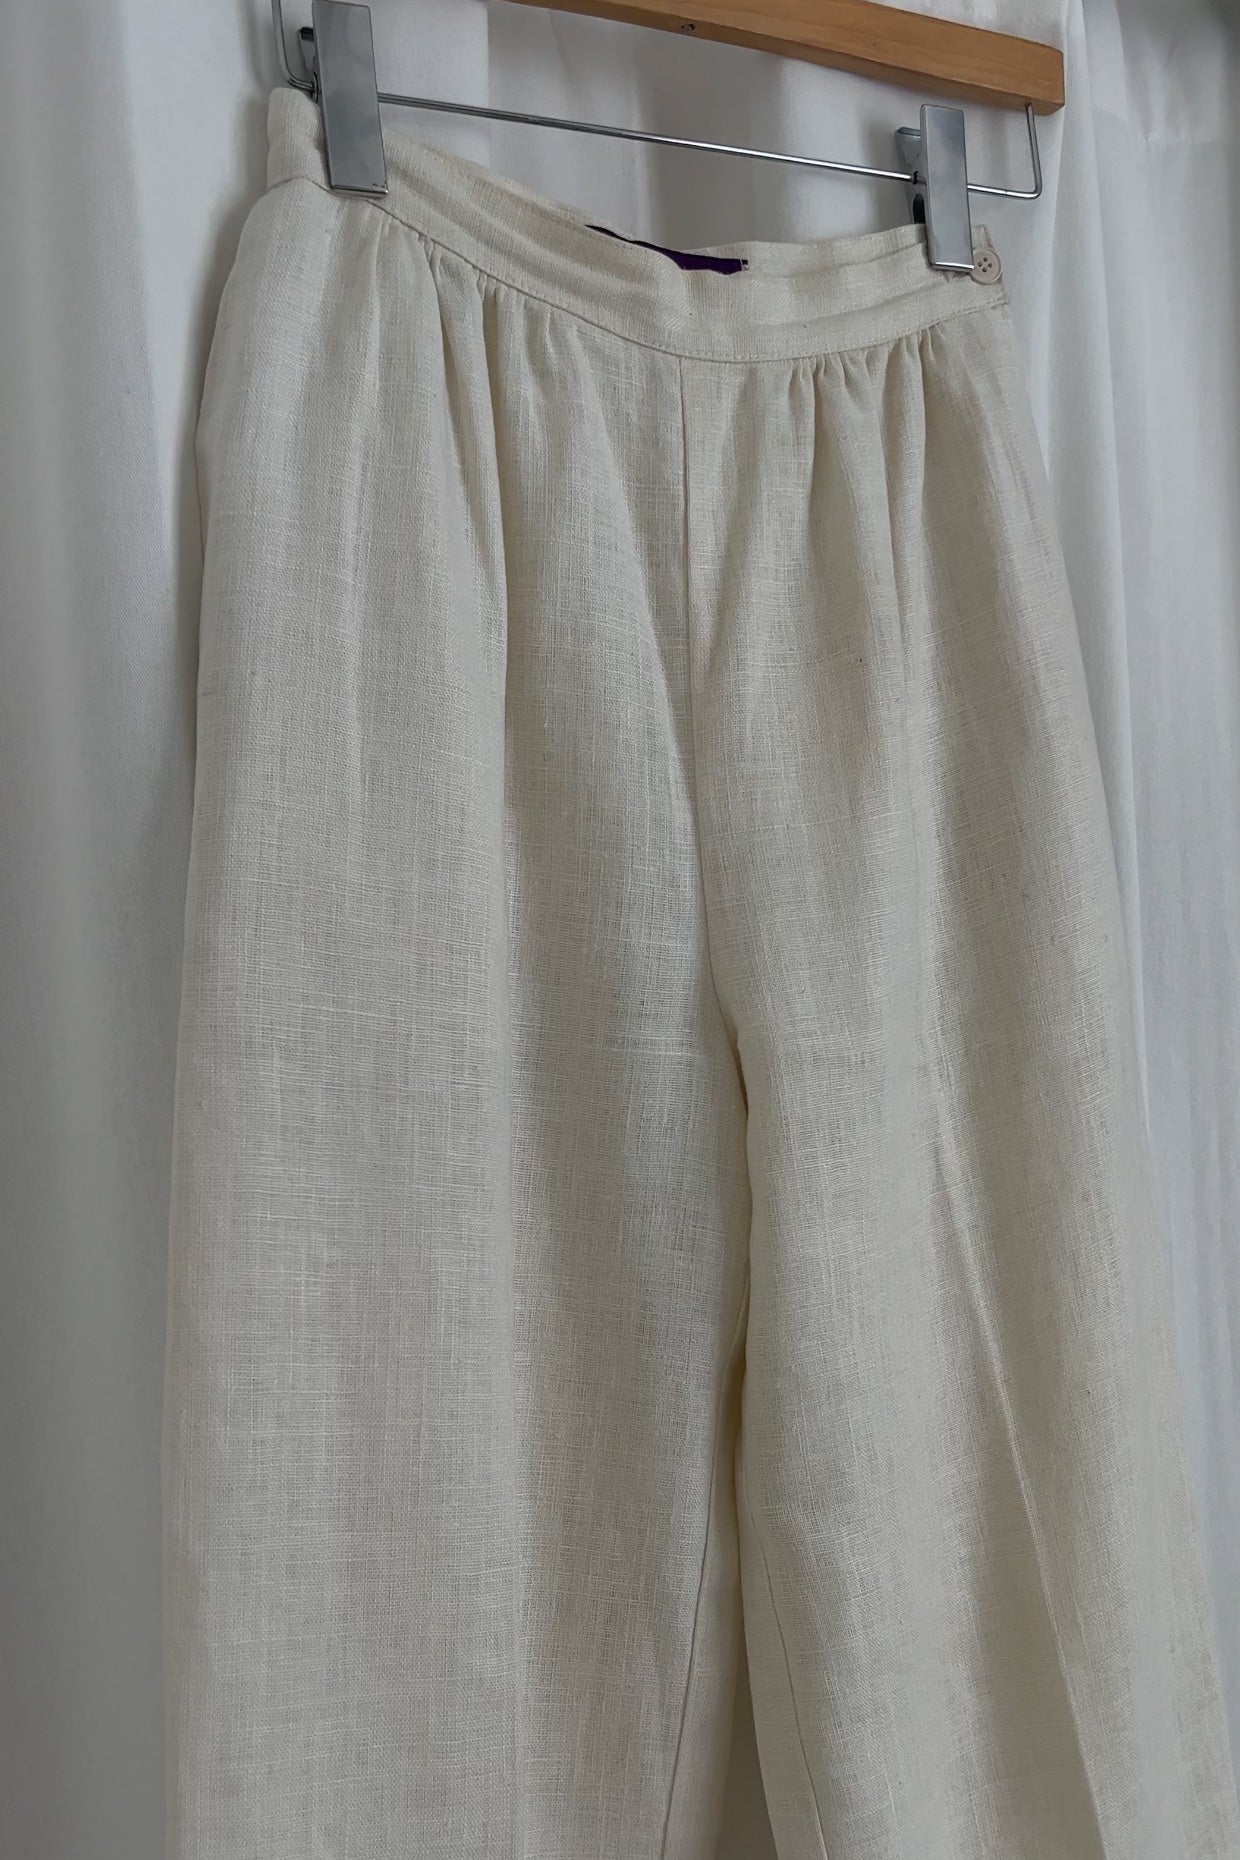 Vintage Ivoire Linen High Waisted and Cuffed Trousers